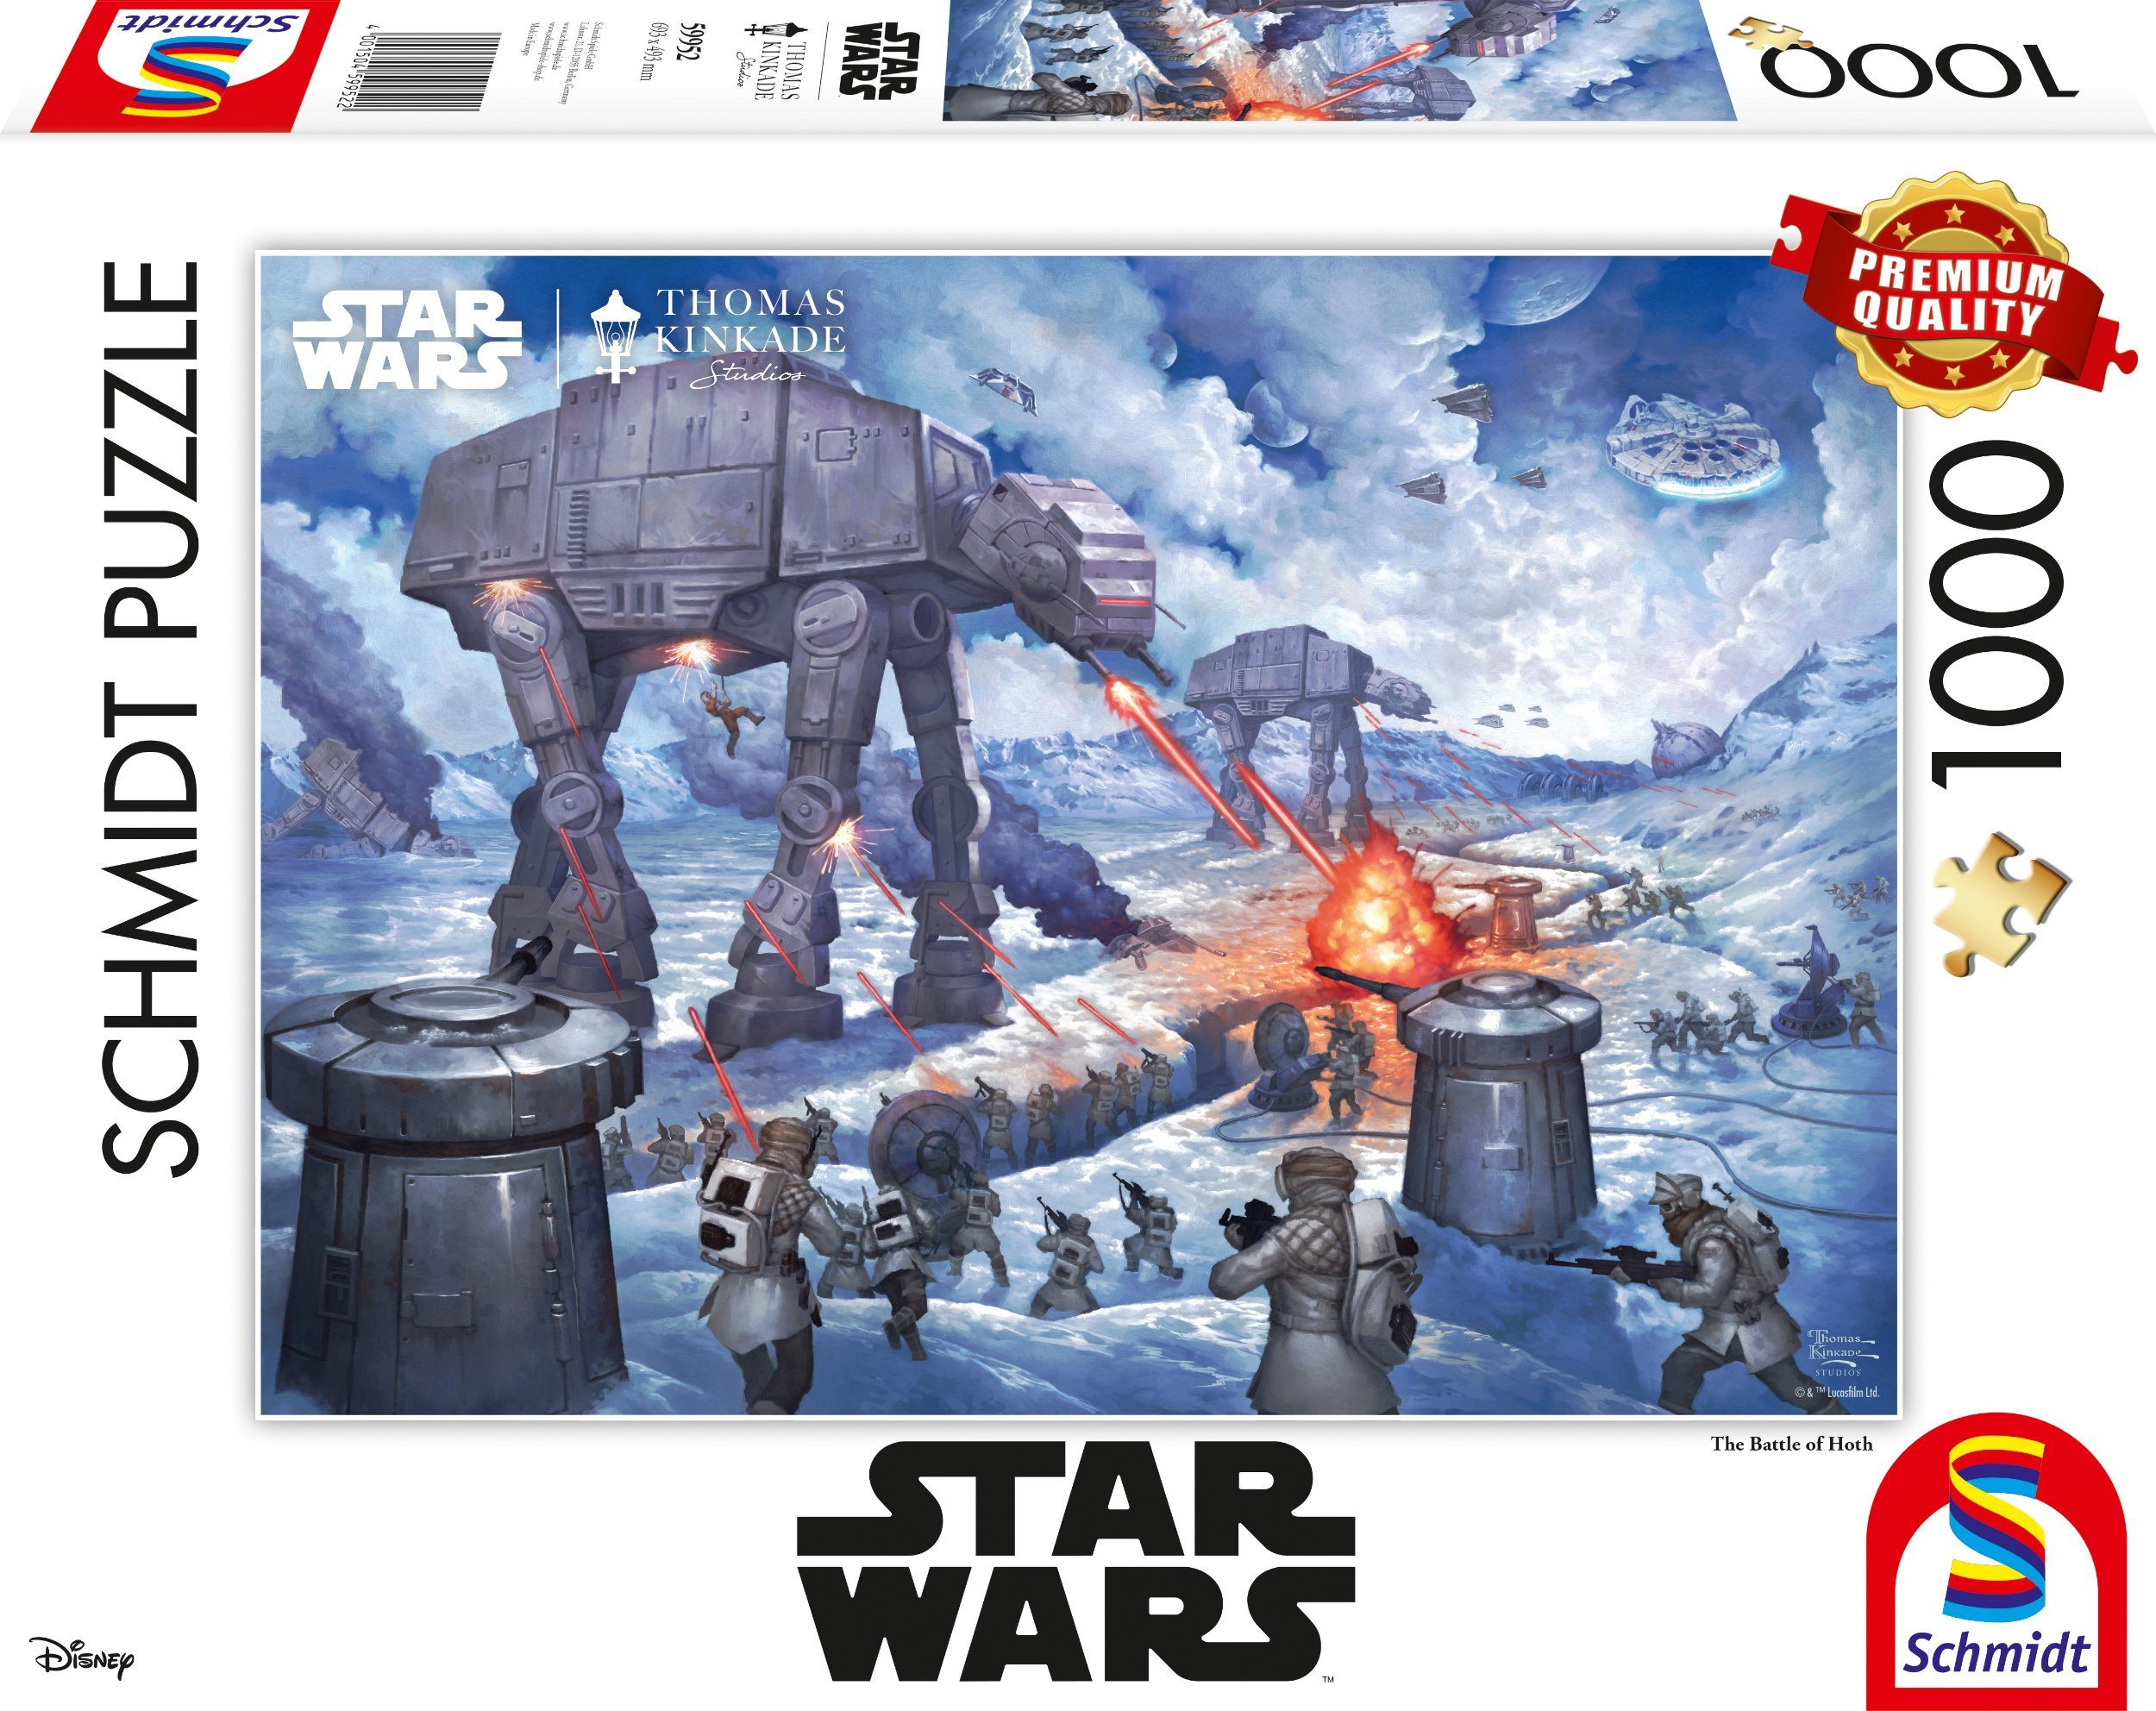 in Battle Puzzleteile, of Made Schmidt Hoth, Puzzle Spiele The Europe 1000